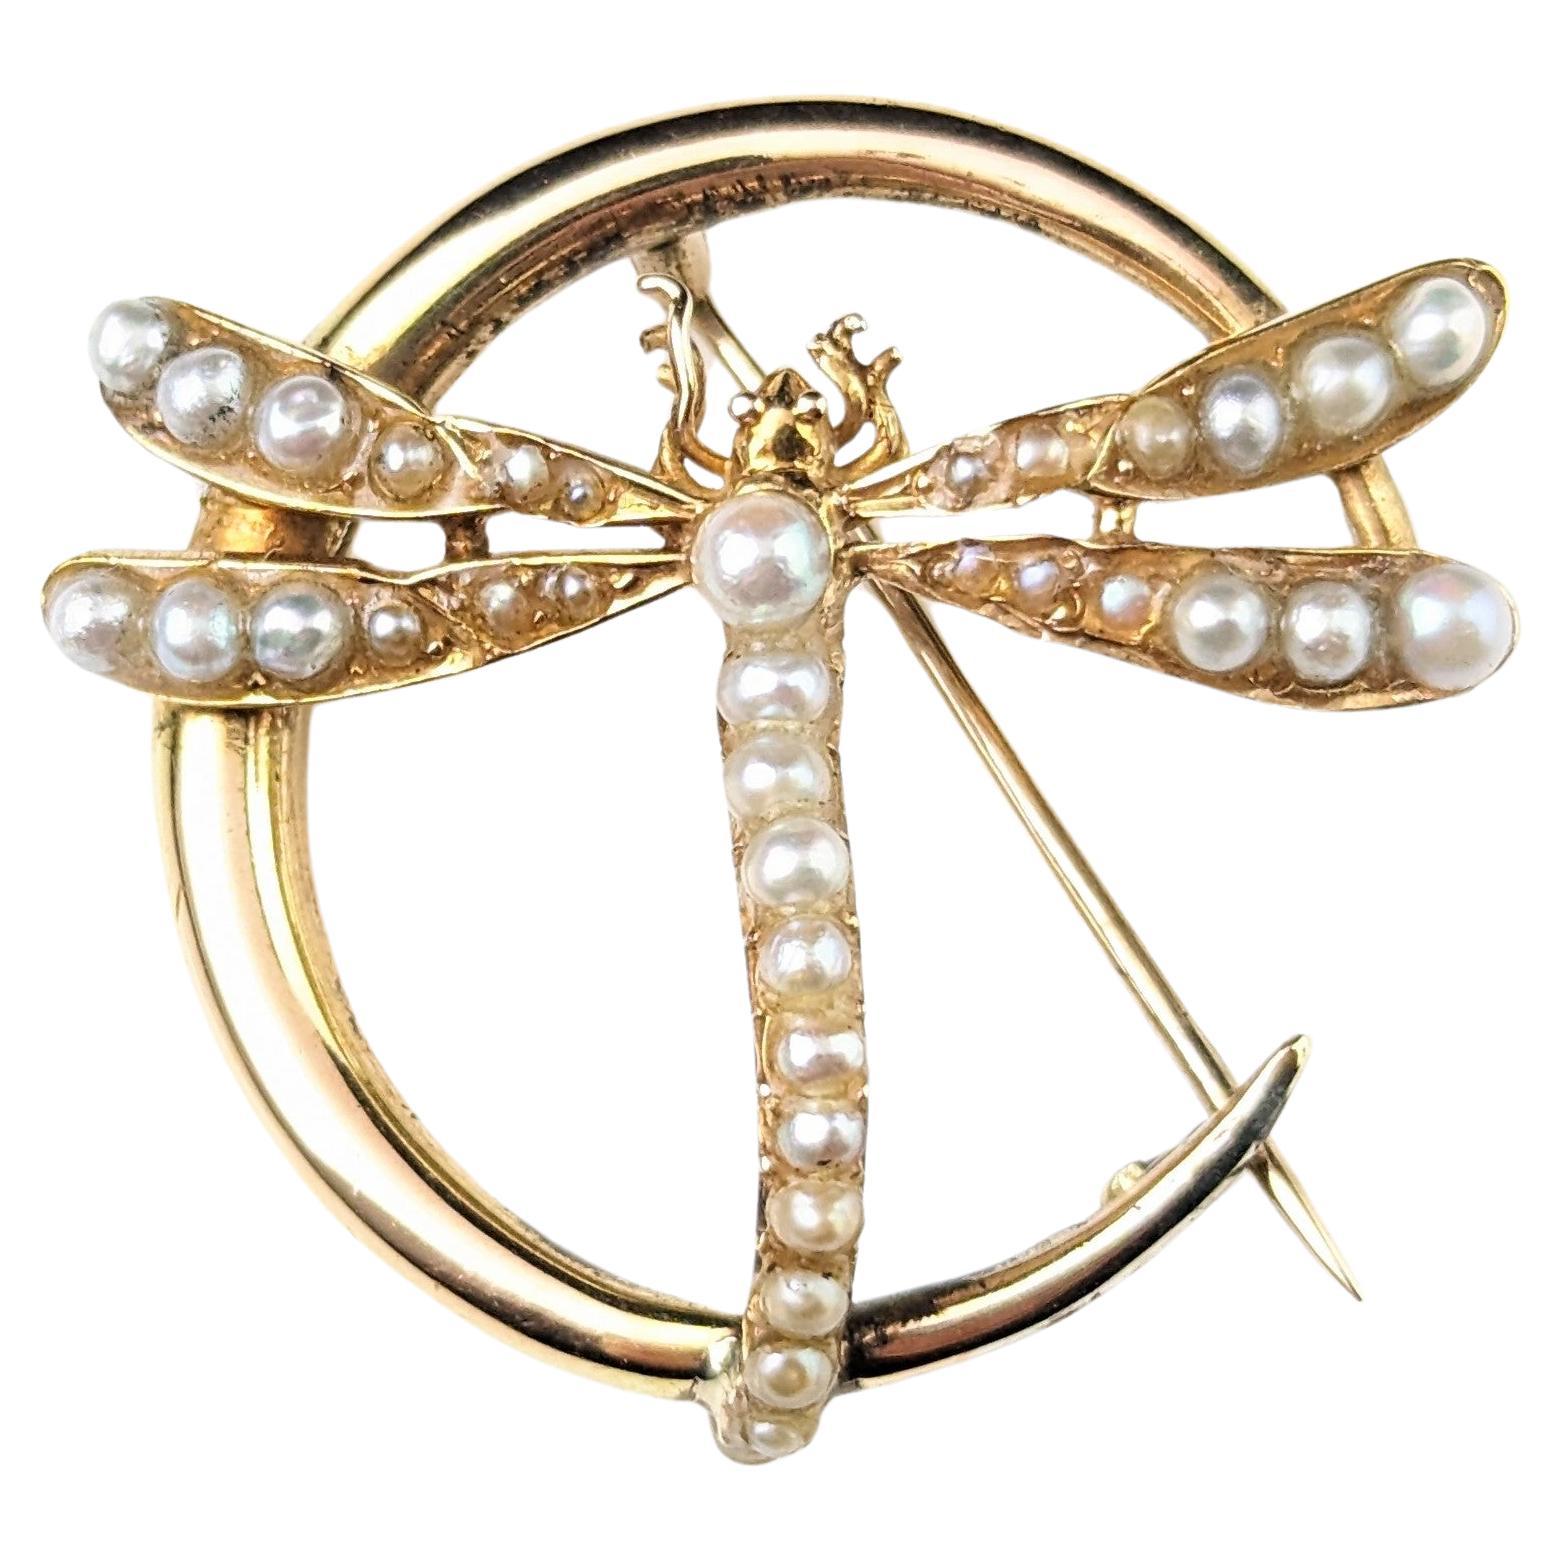 Antique 9k gold Crescent moon and Dragonfly brooch, Pearl 